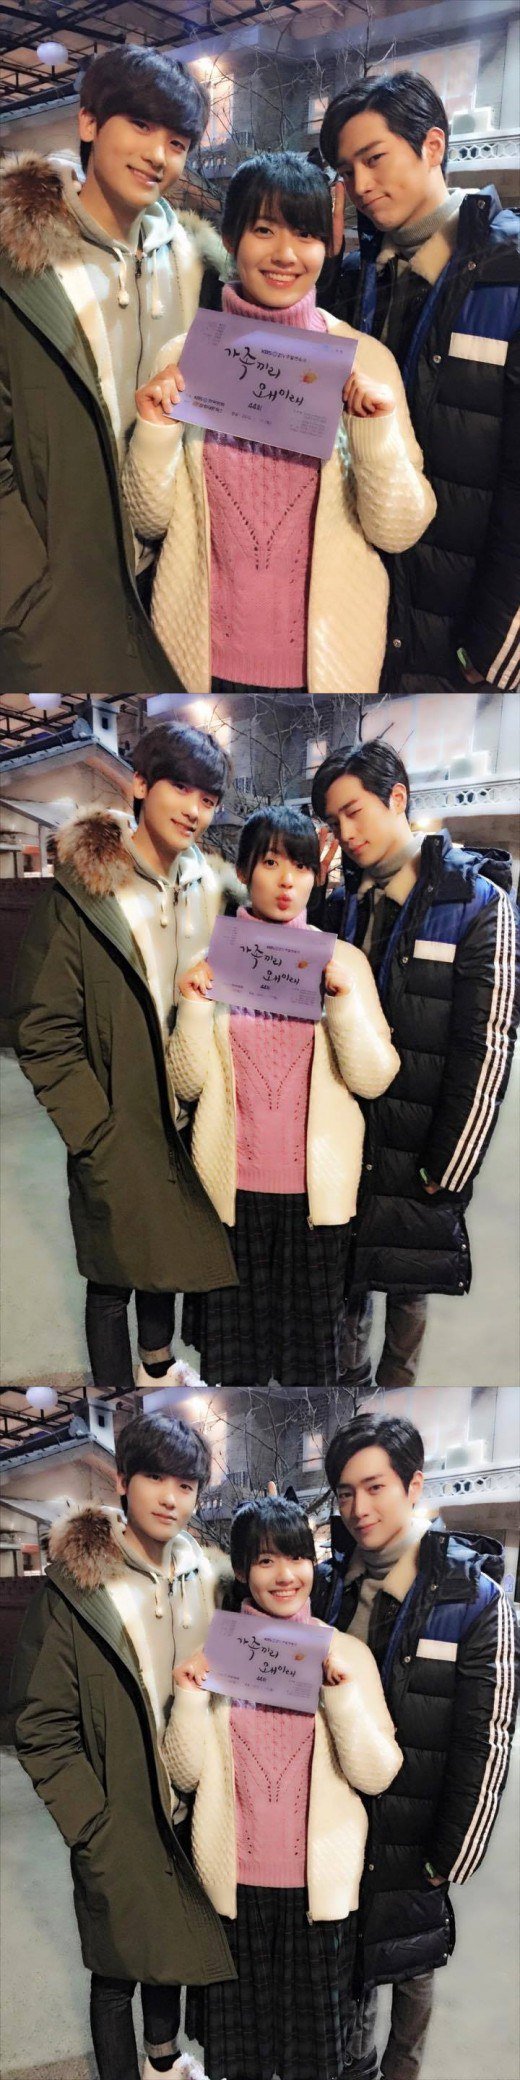 Near the end of &quot;This Is Family&quot; with Nam Ji-hyeon, Hyung Sik and Seo Kang-joon